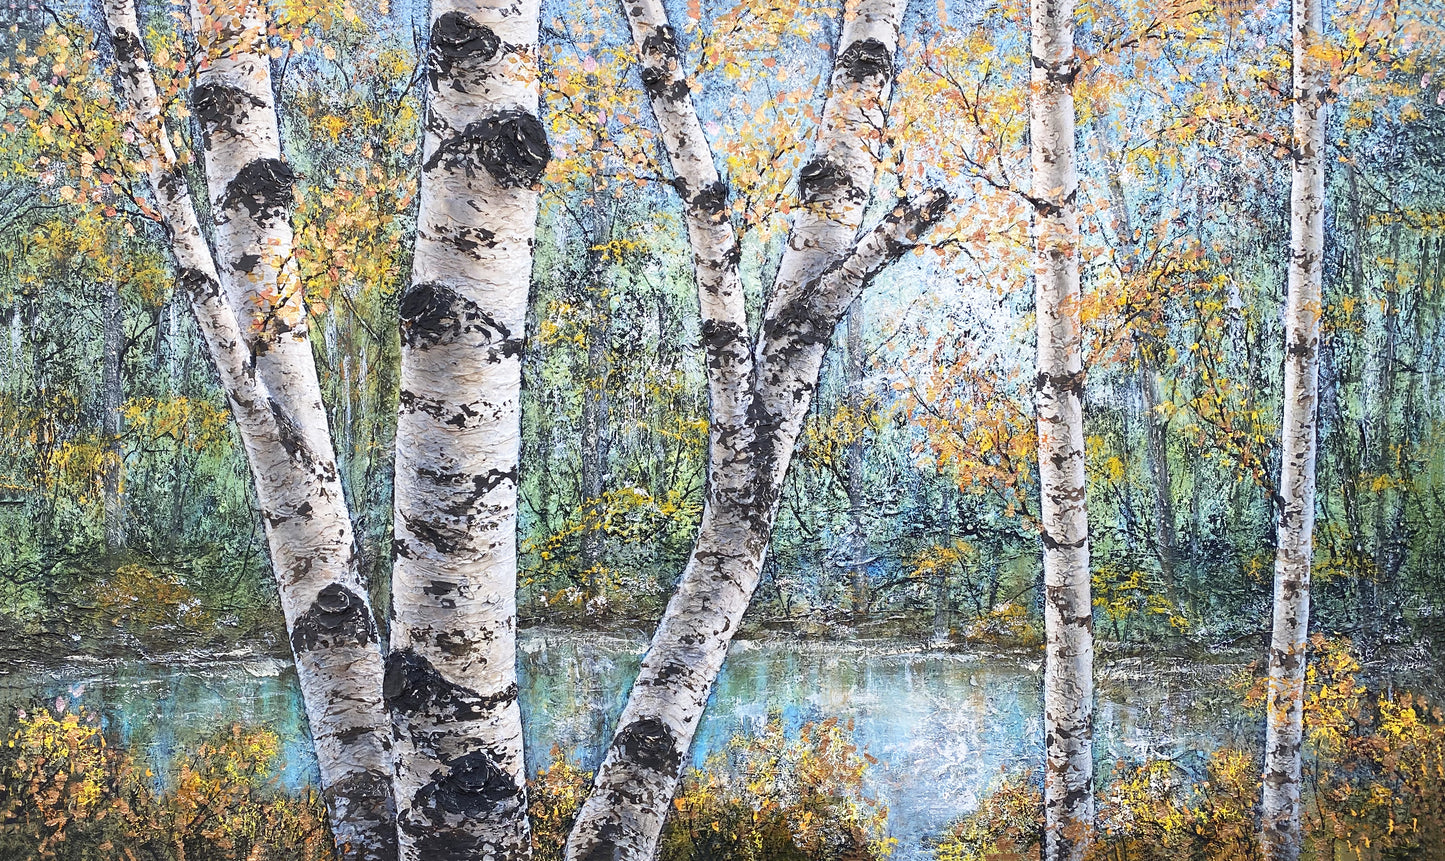 Woodland Birches by Gerd Schmidt. A stunning original painting of birch trees and a woodland pond by Gerd Schmidt that showcases the beauty of quiet forest scenery.